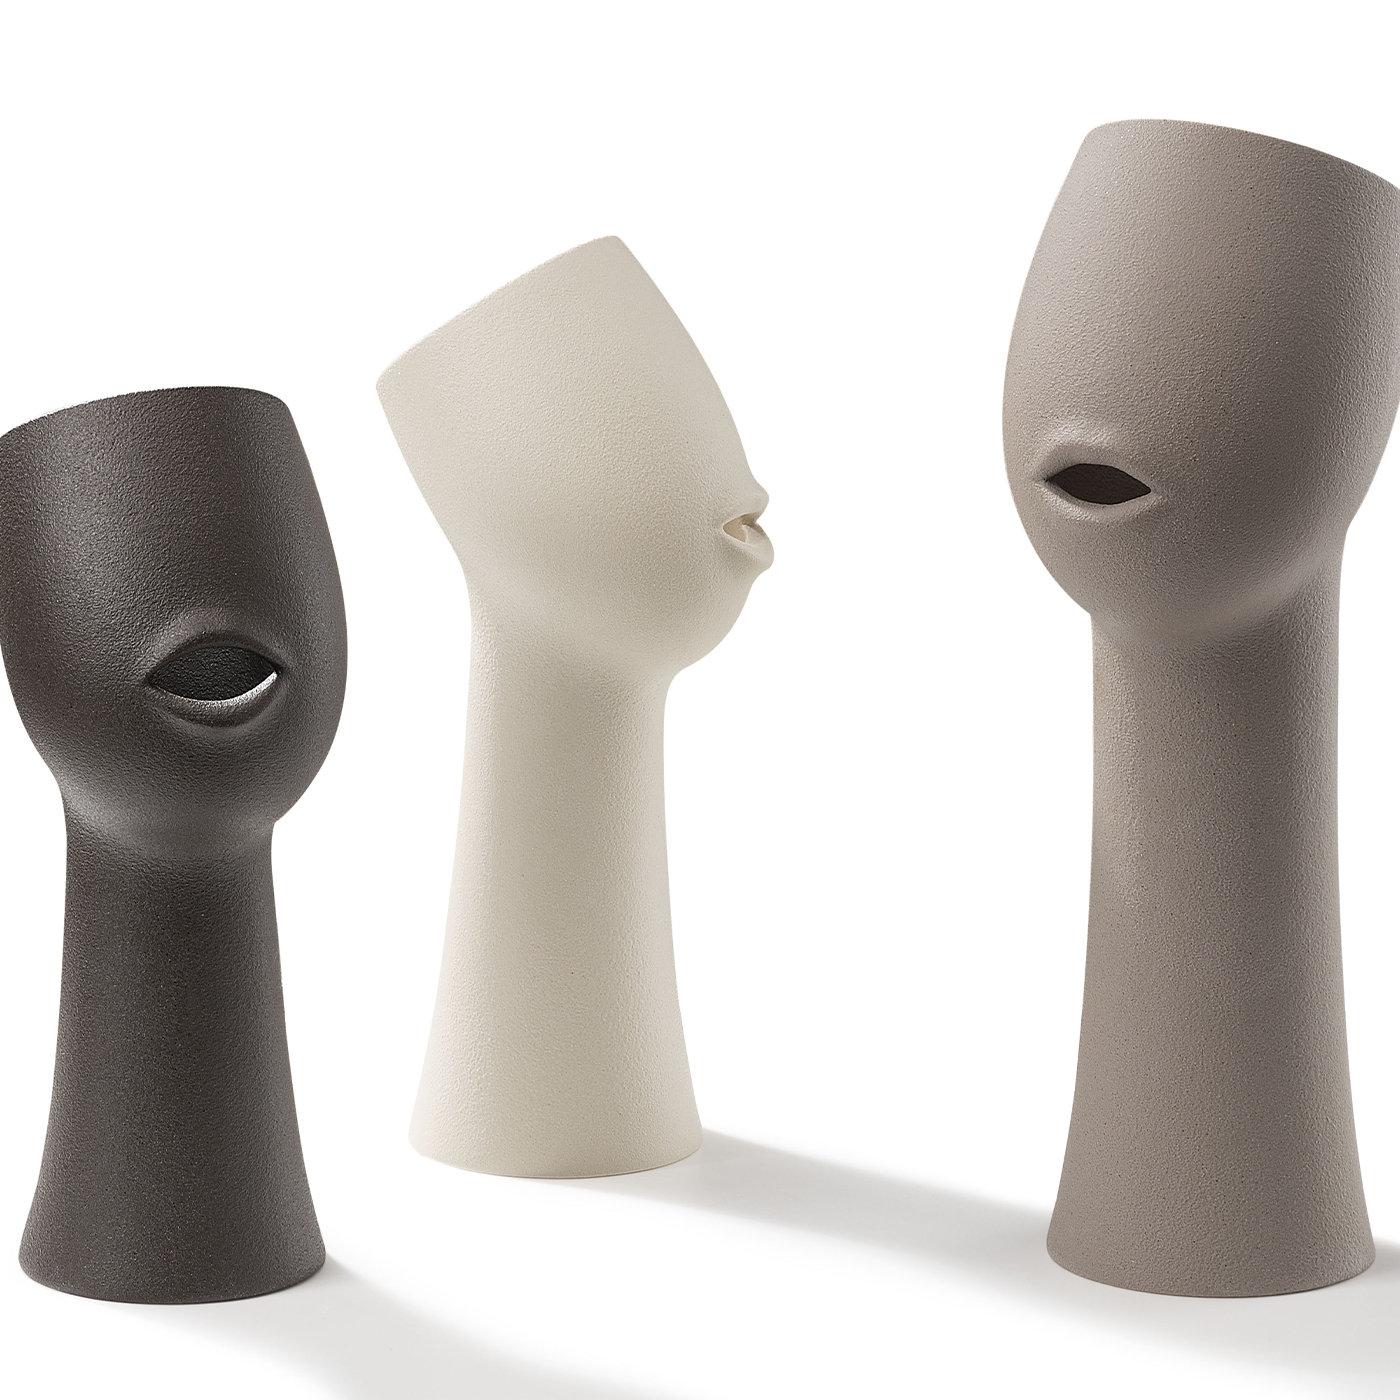 Characterized by the form of a neck and face and featuring a small opening in the shape of a mouth, this fascinating Voice Vase is 43 cm tall and crafted in gray ceramic. Delightfully unique, it will compliment any contemporary setting.